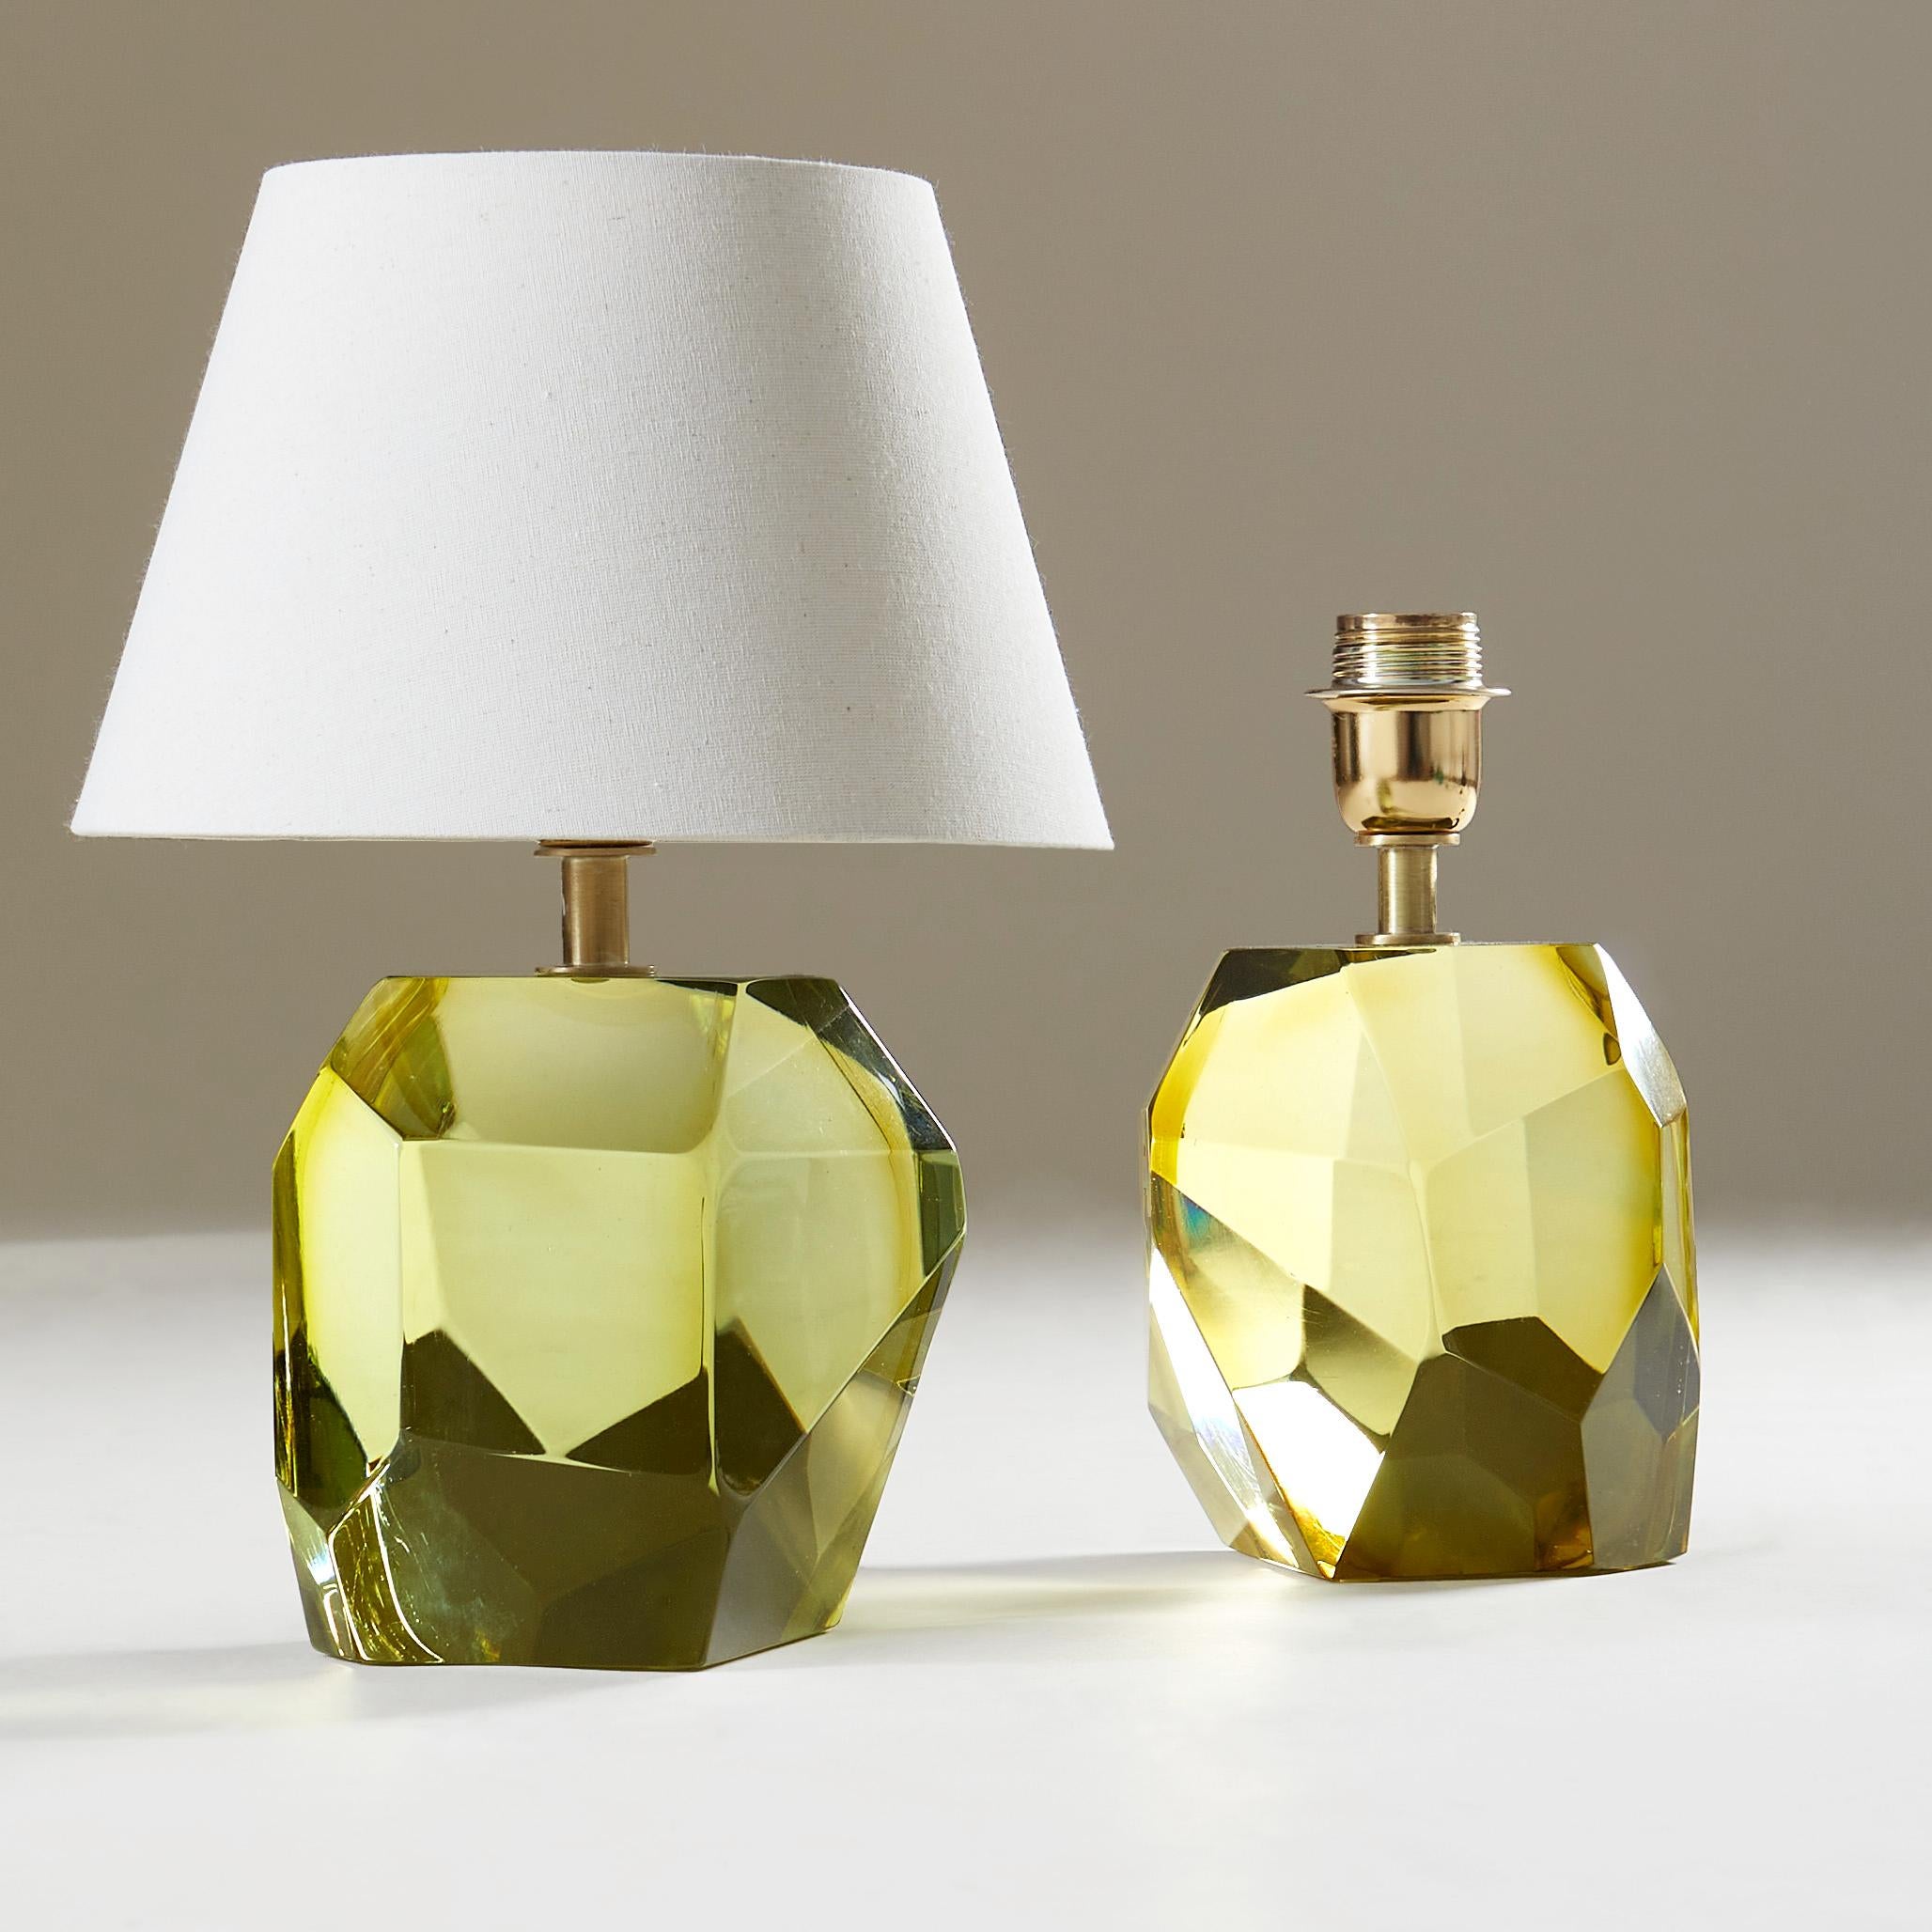 Contemporary hand-crafted and hand-polished pair of heavy solid Murano 'rock' lamp with brass fitting.

Signed 'Murano'.

Also available in emerald, amber, turquoise, bronze and clear.

Also sold individually.

4 week lead-time if not in